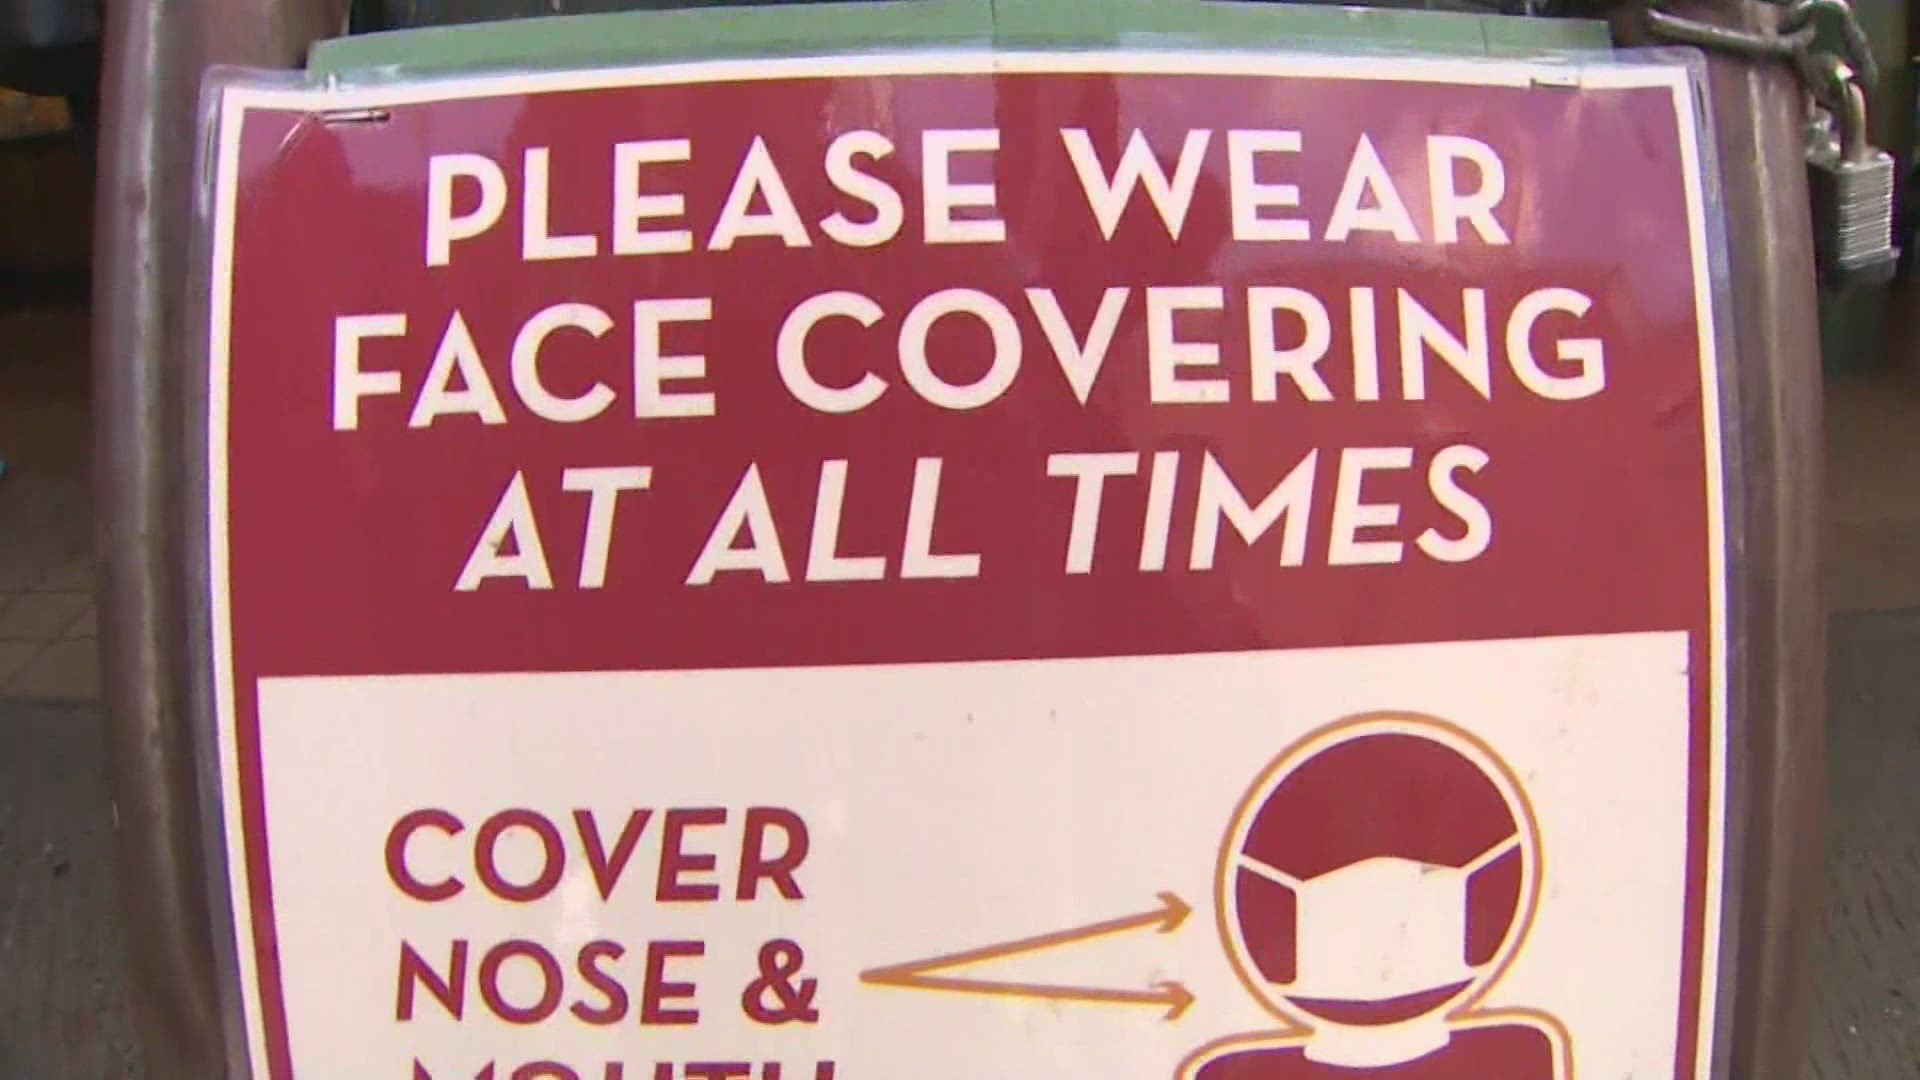 Three weeks after King County dropped its masking directive, the county health officer again recommends all people wear masks in indoor public spaces.